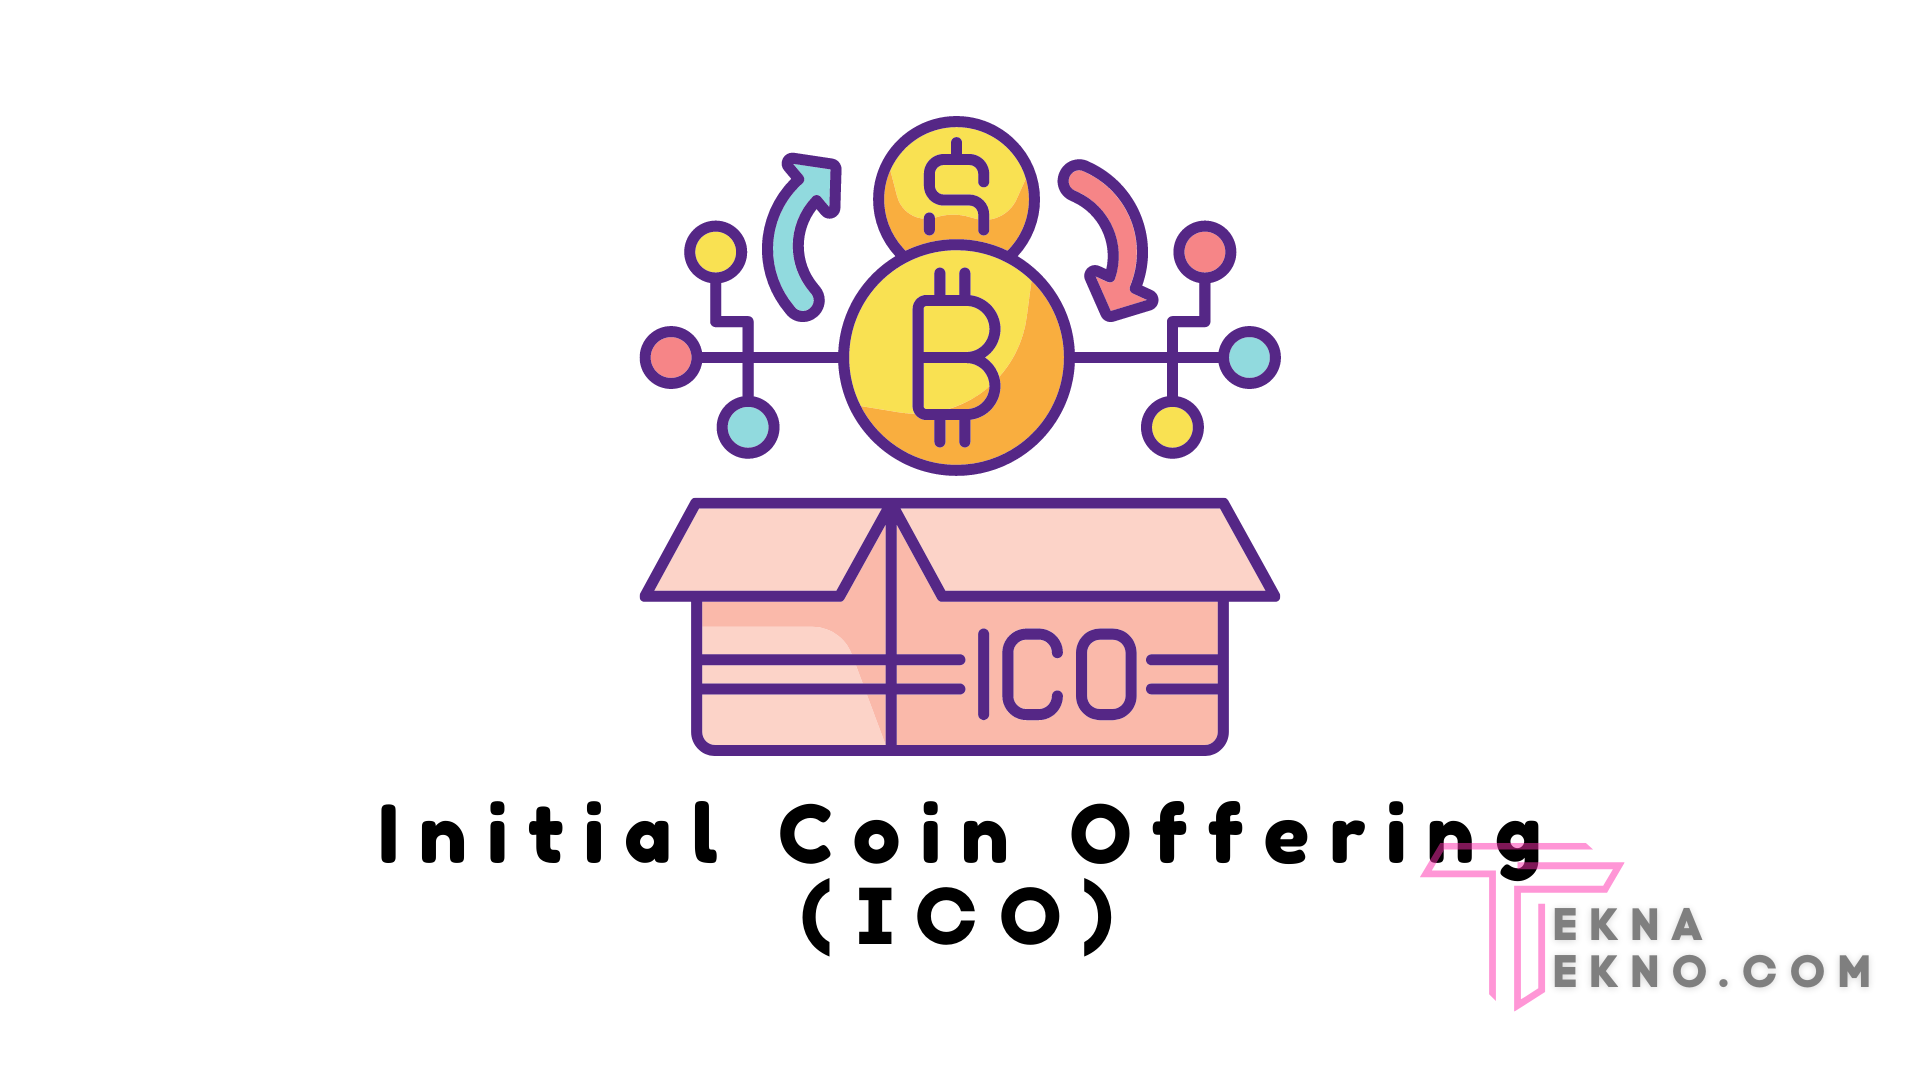 Mengenal Initial Coin Offering